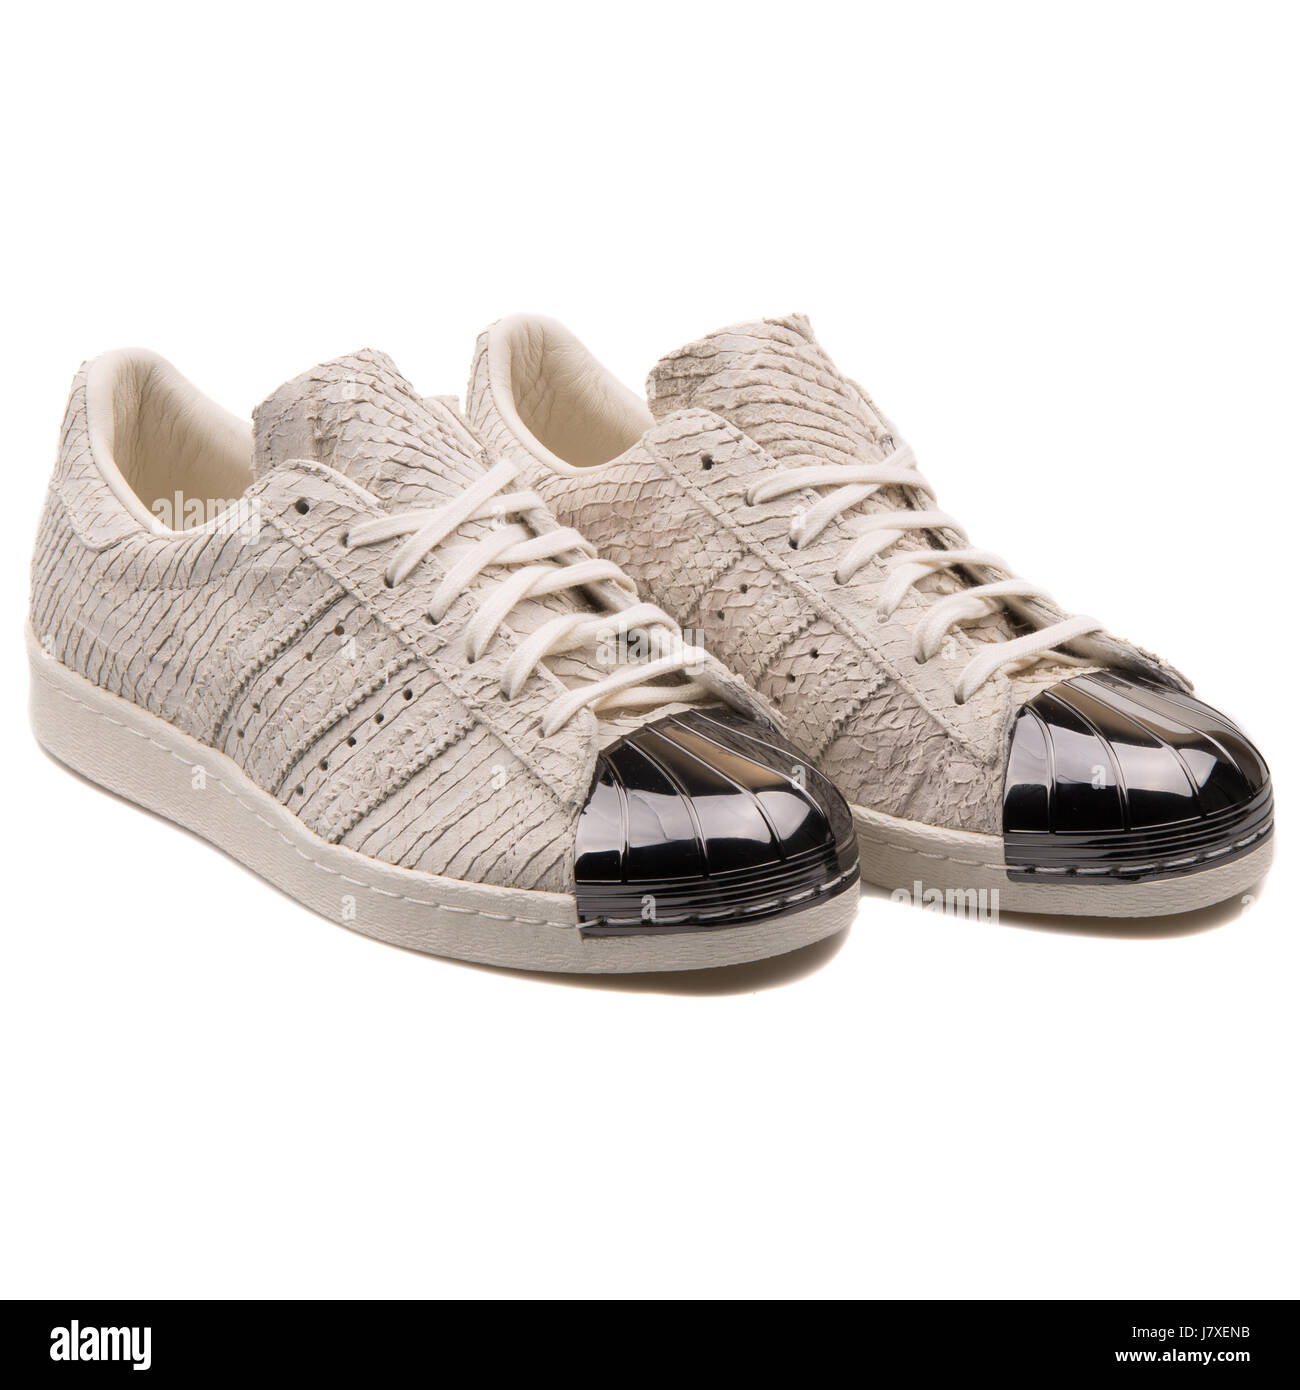 Superstar 80S W Women's Classic White Leather with Skin Pattern Sneakers - S82483 Stock Photo - Alamy